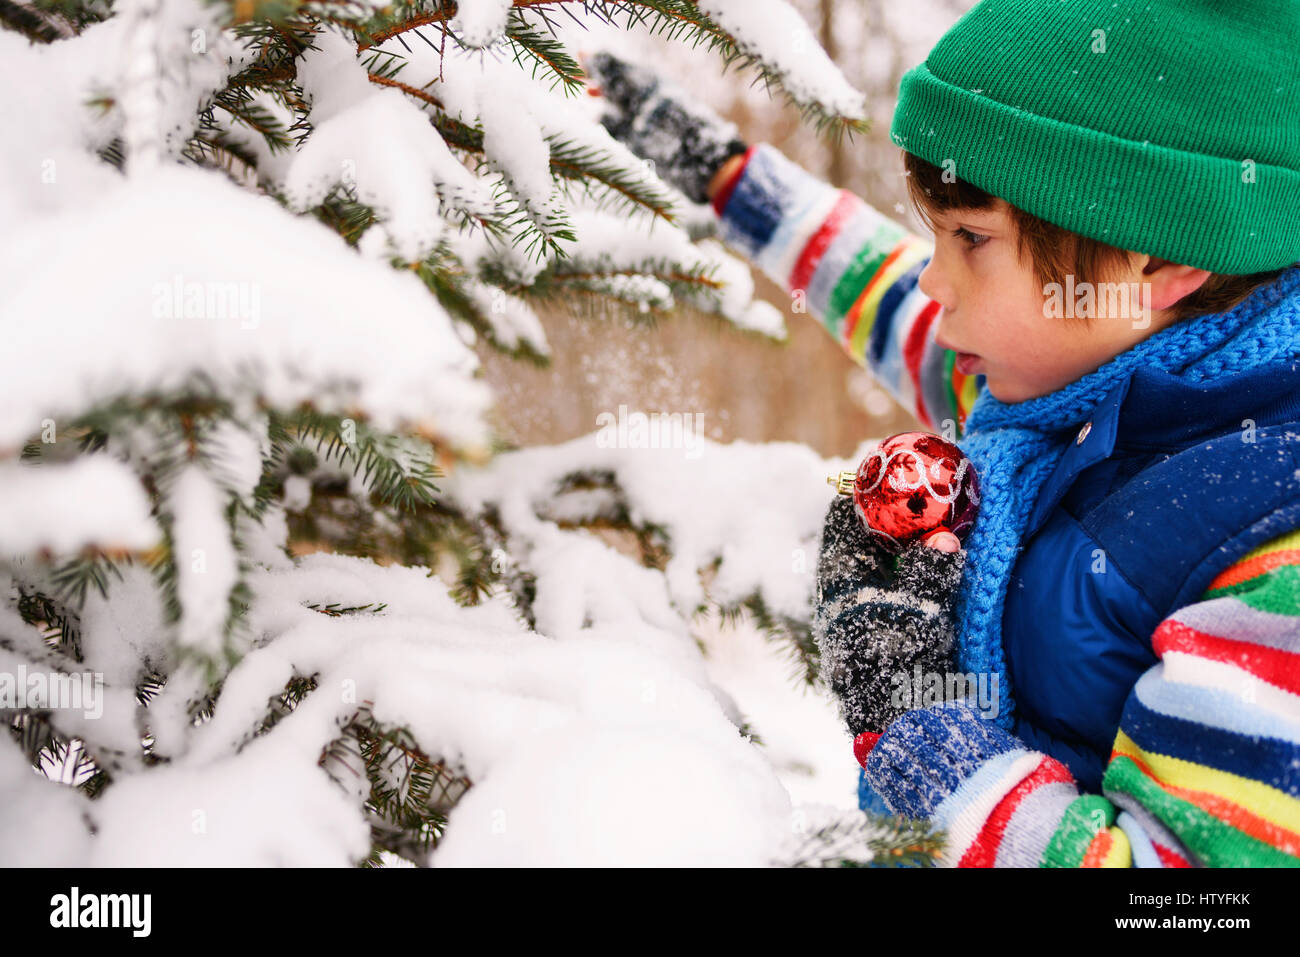 Boy decorating a Christmas tree in the garden Stock Photo